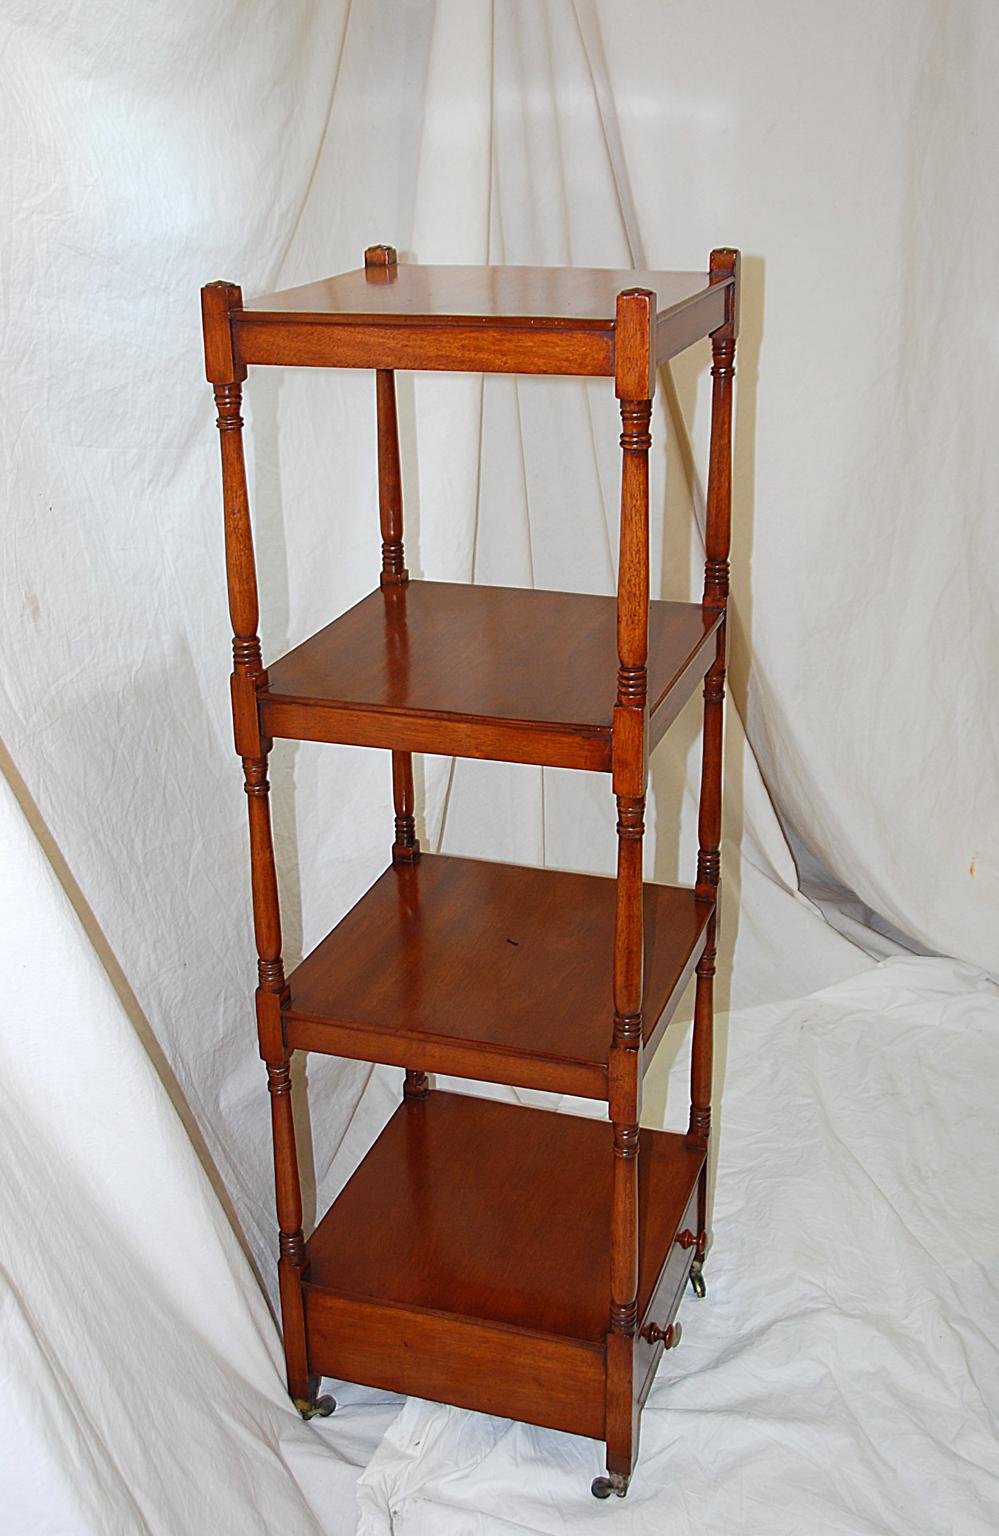 English Regency period mahogany four tier étagère with drawer, ring turned supports and drawer in the bottom make these display shelves quite versatile. They will handsomely display a collection or books and bibelots, adding height and style to an